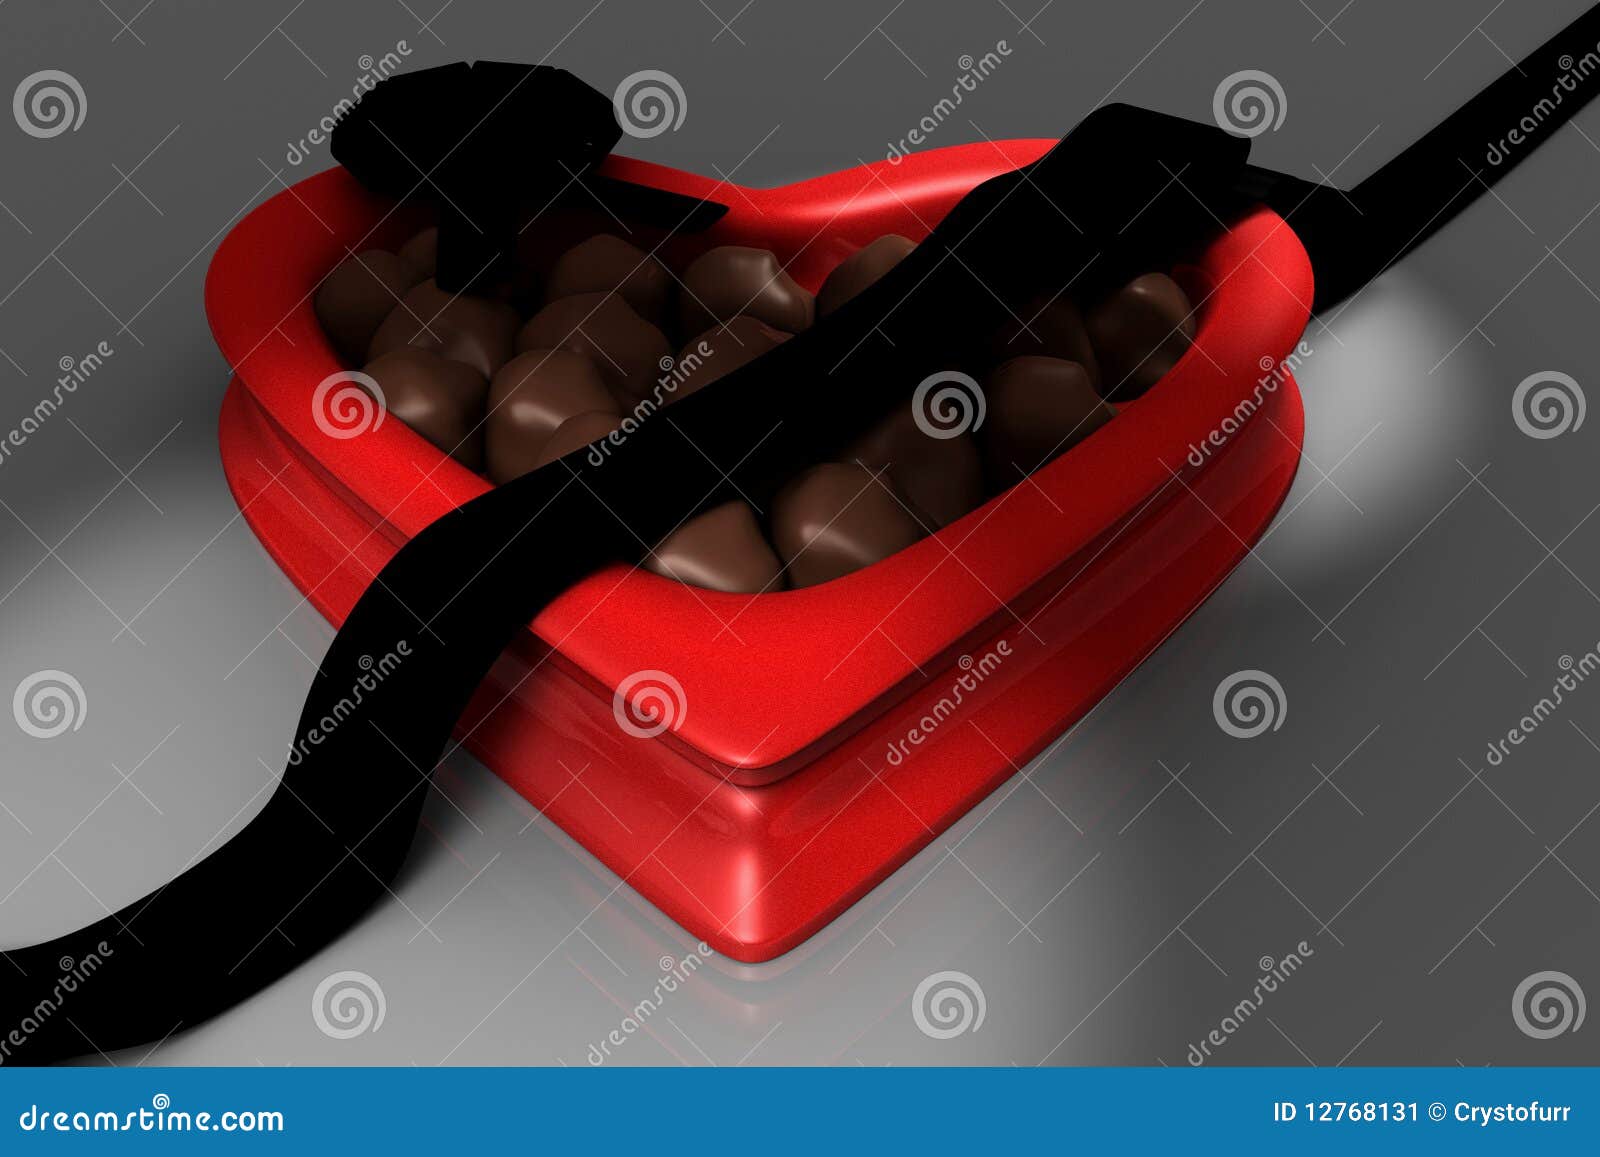 Red heart shaped box of chocolates on hard wood surface with a white 